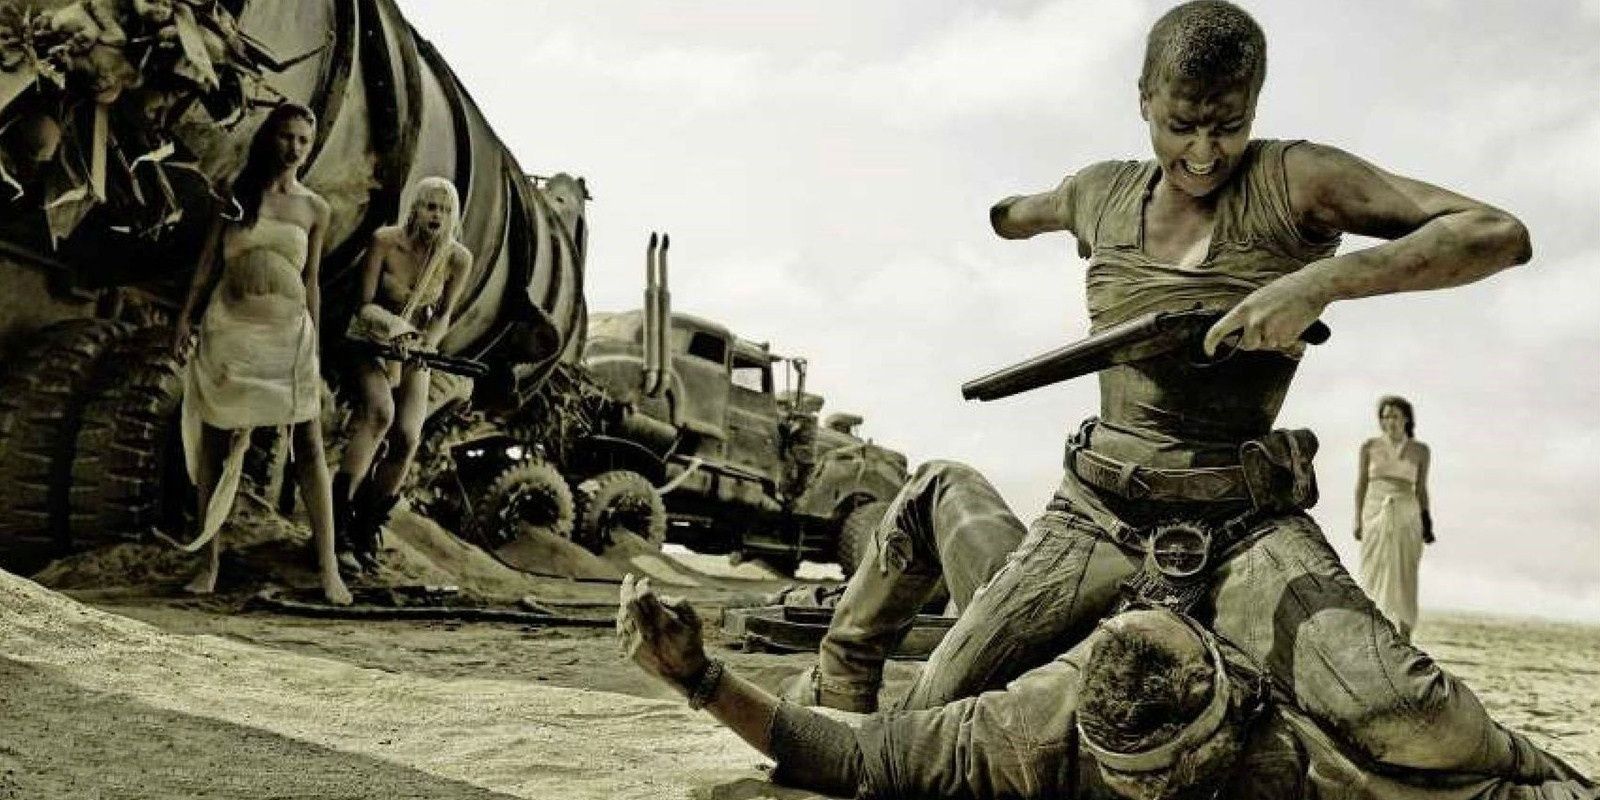 Imperator Furiosa from Mad Max: Fury Road fighting a man.